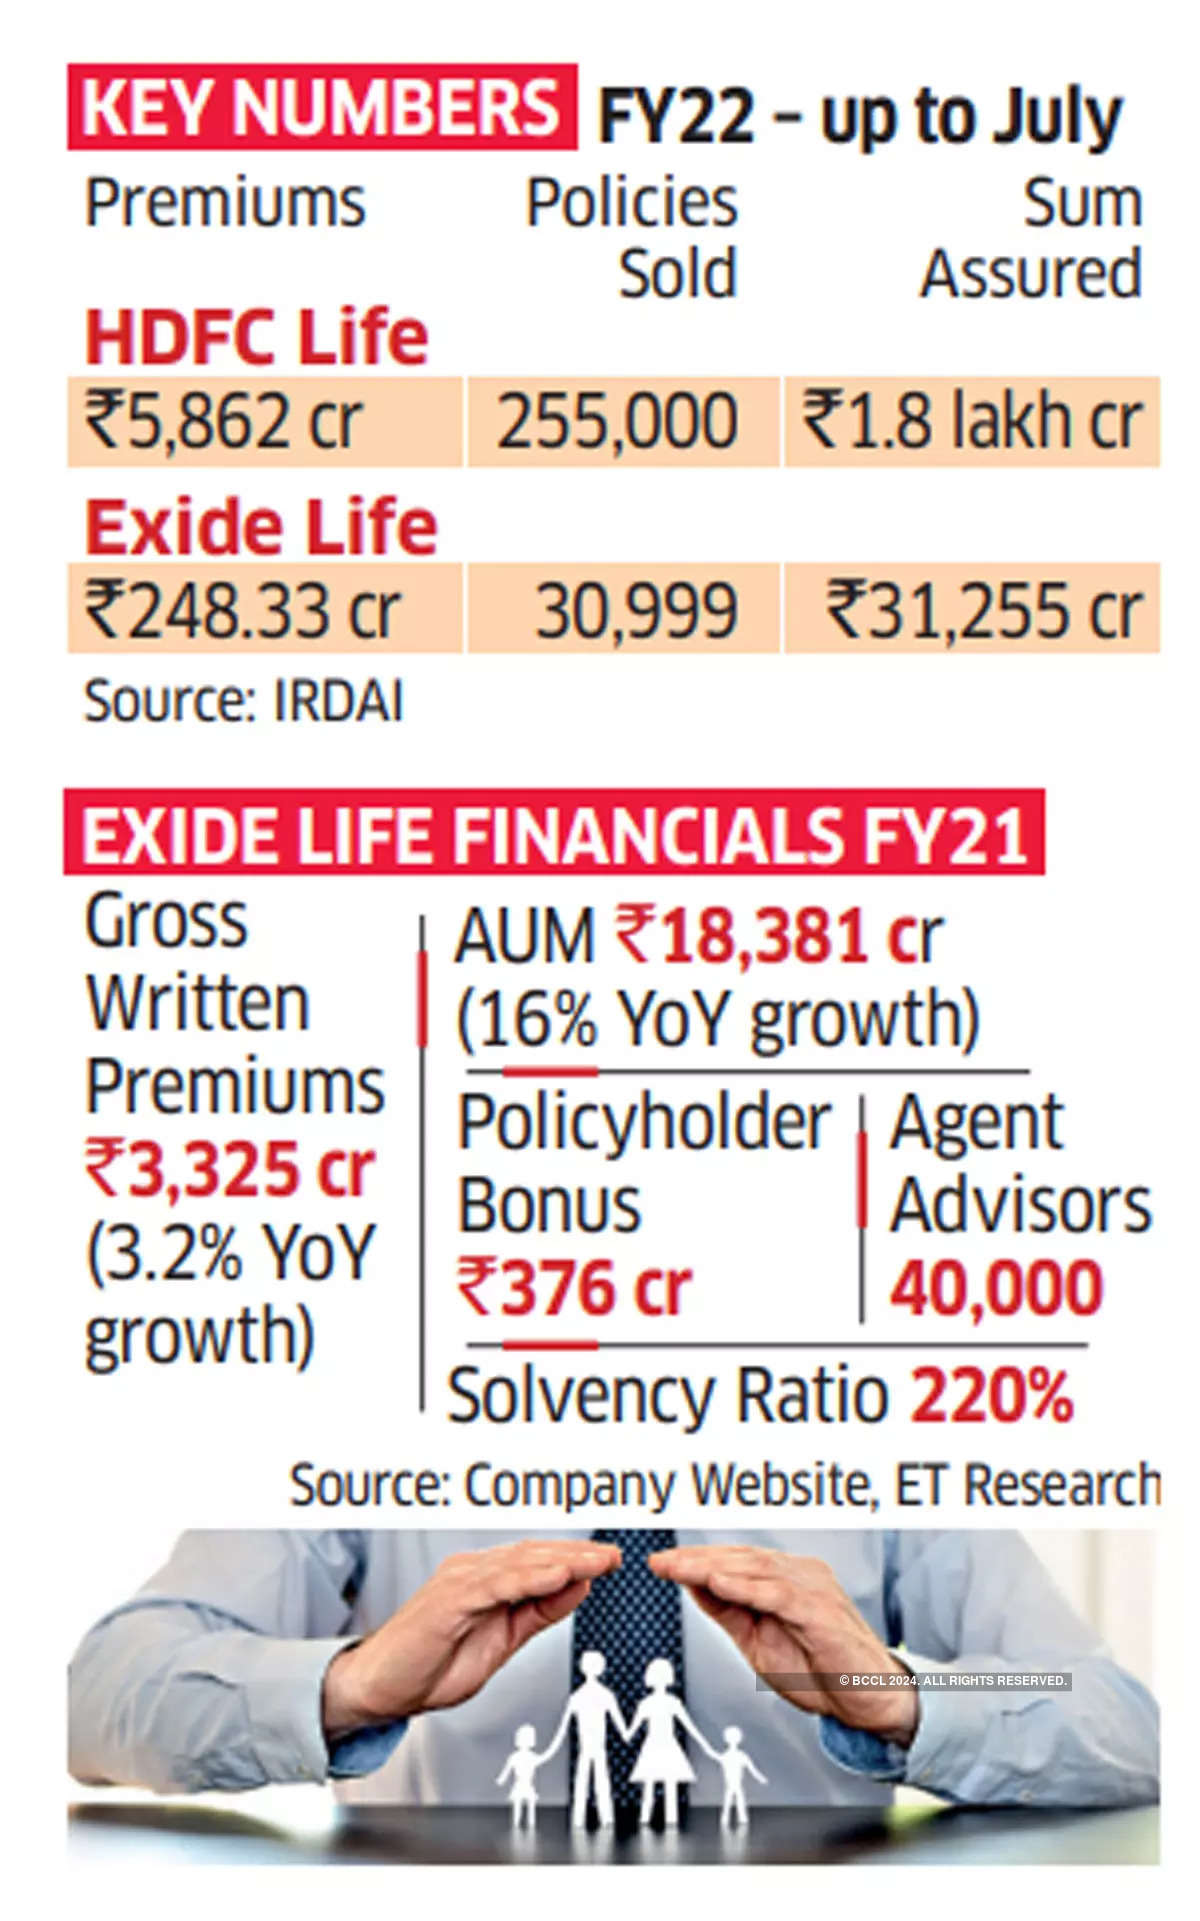 Hdfc Life Hdfc Life Acquires Exide Life In A Deal Worth Rs 6687 Crore The Economic Times 5128